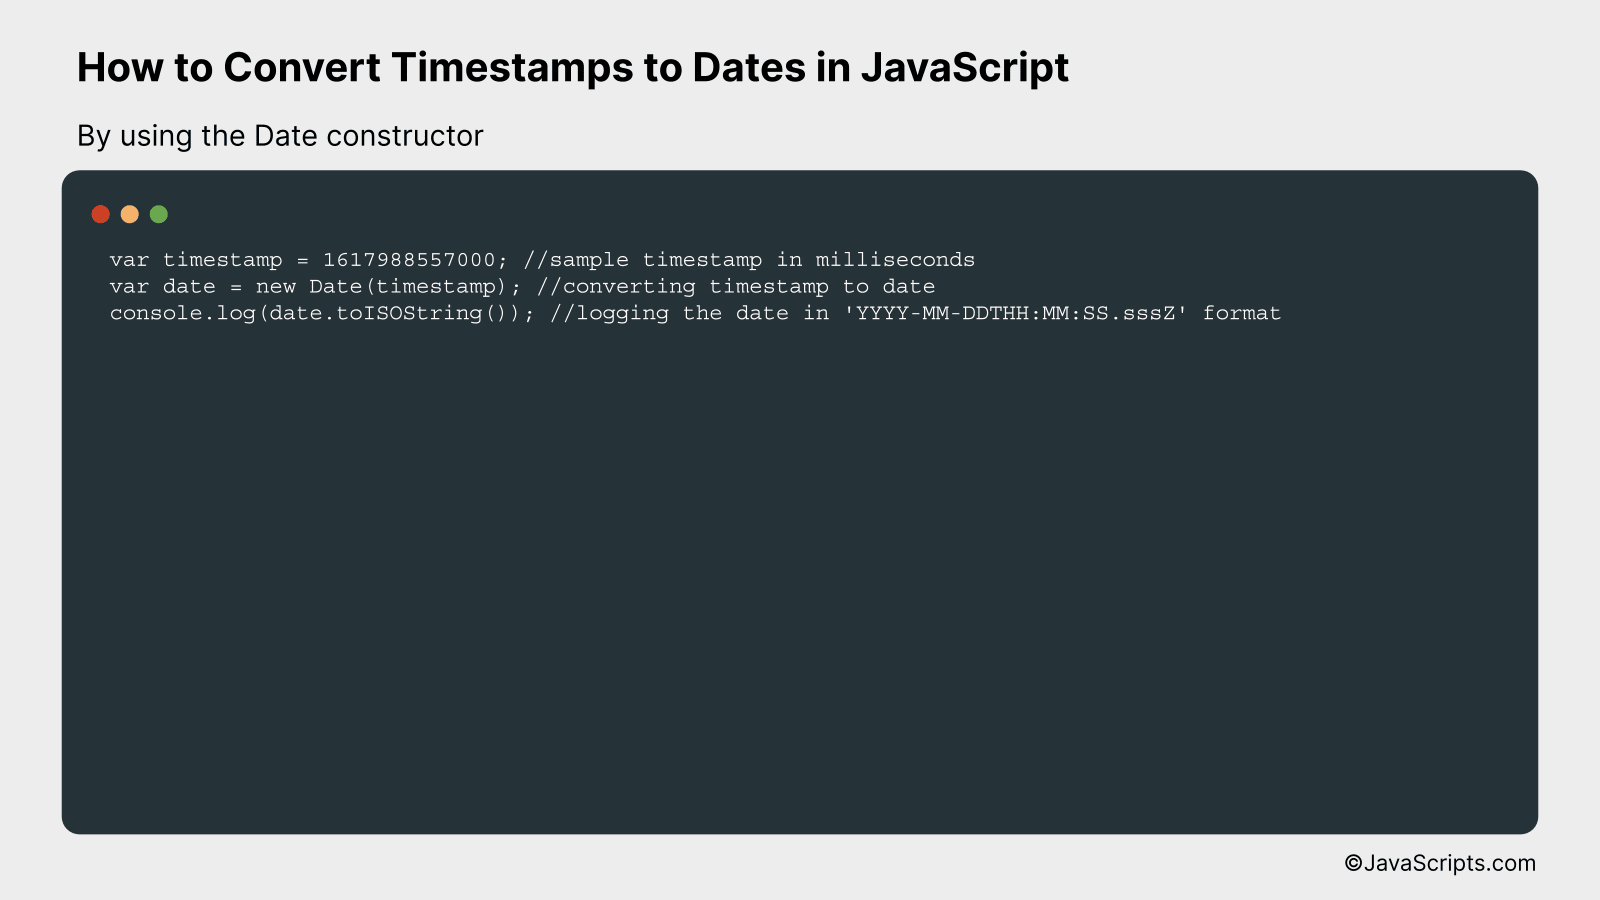 By using the Date constructor